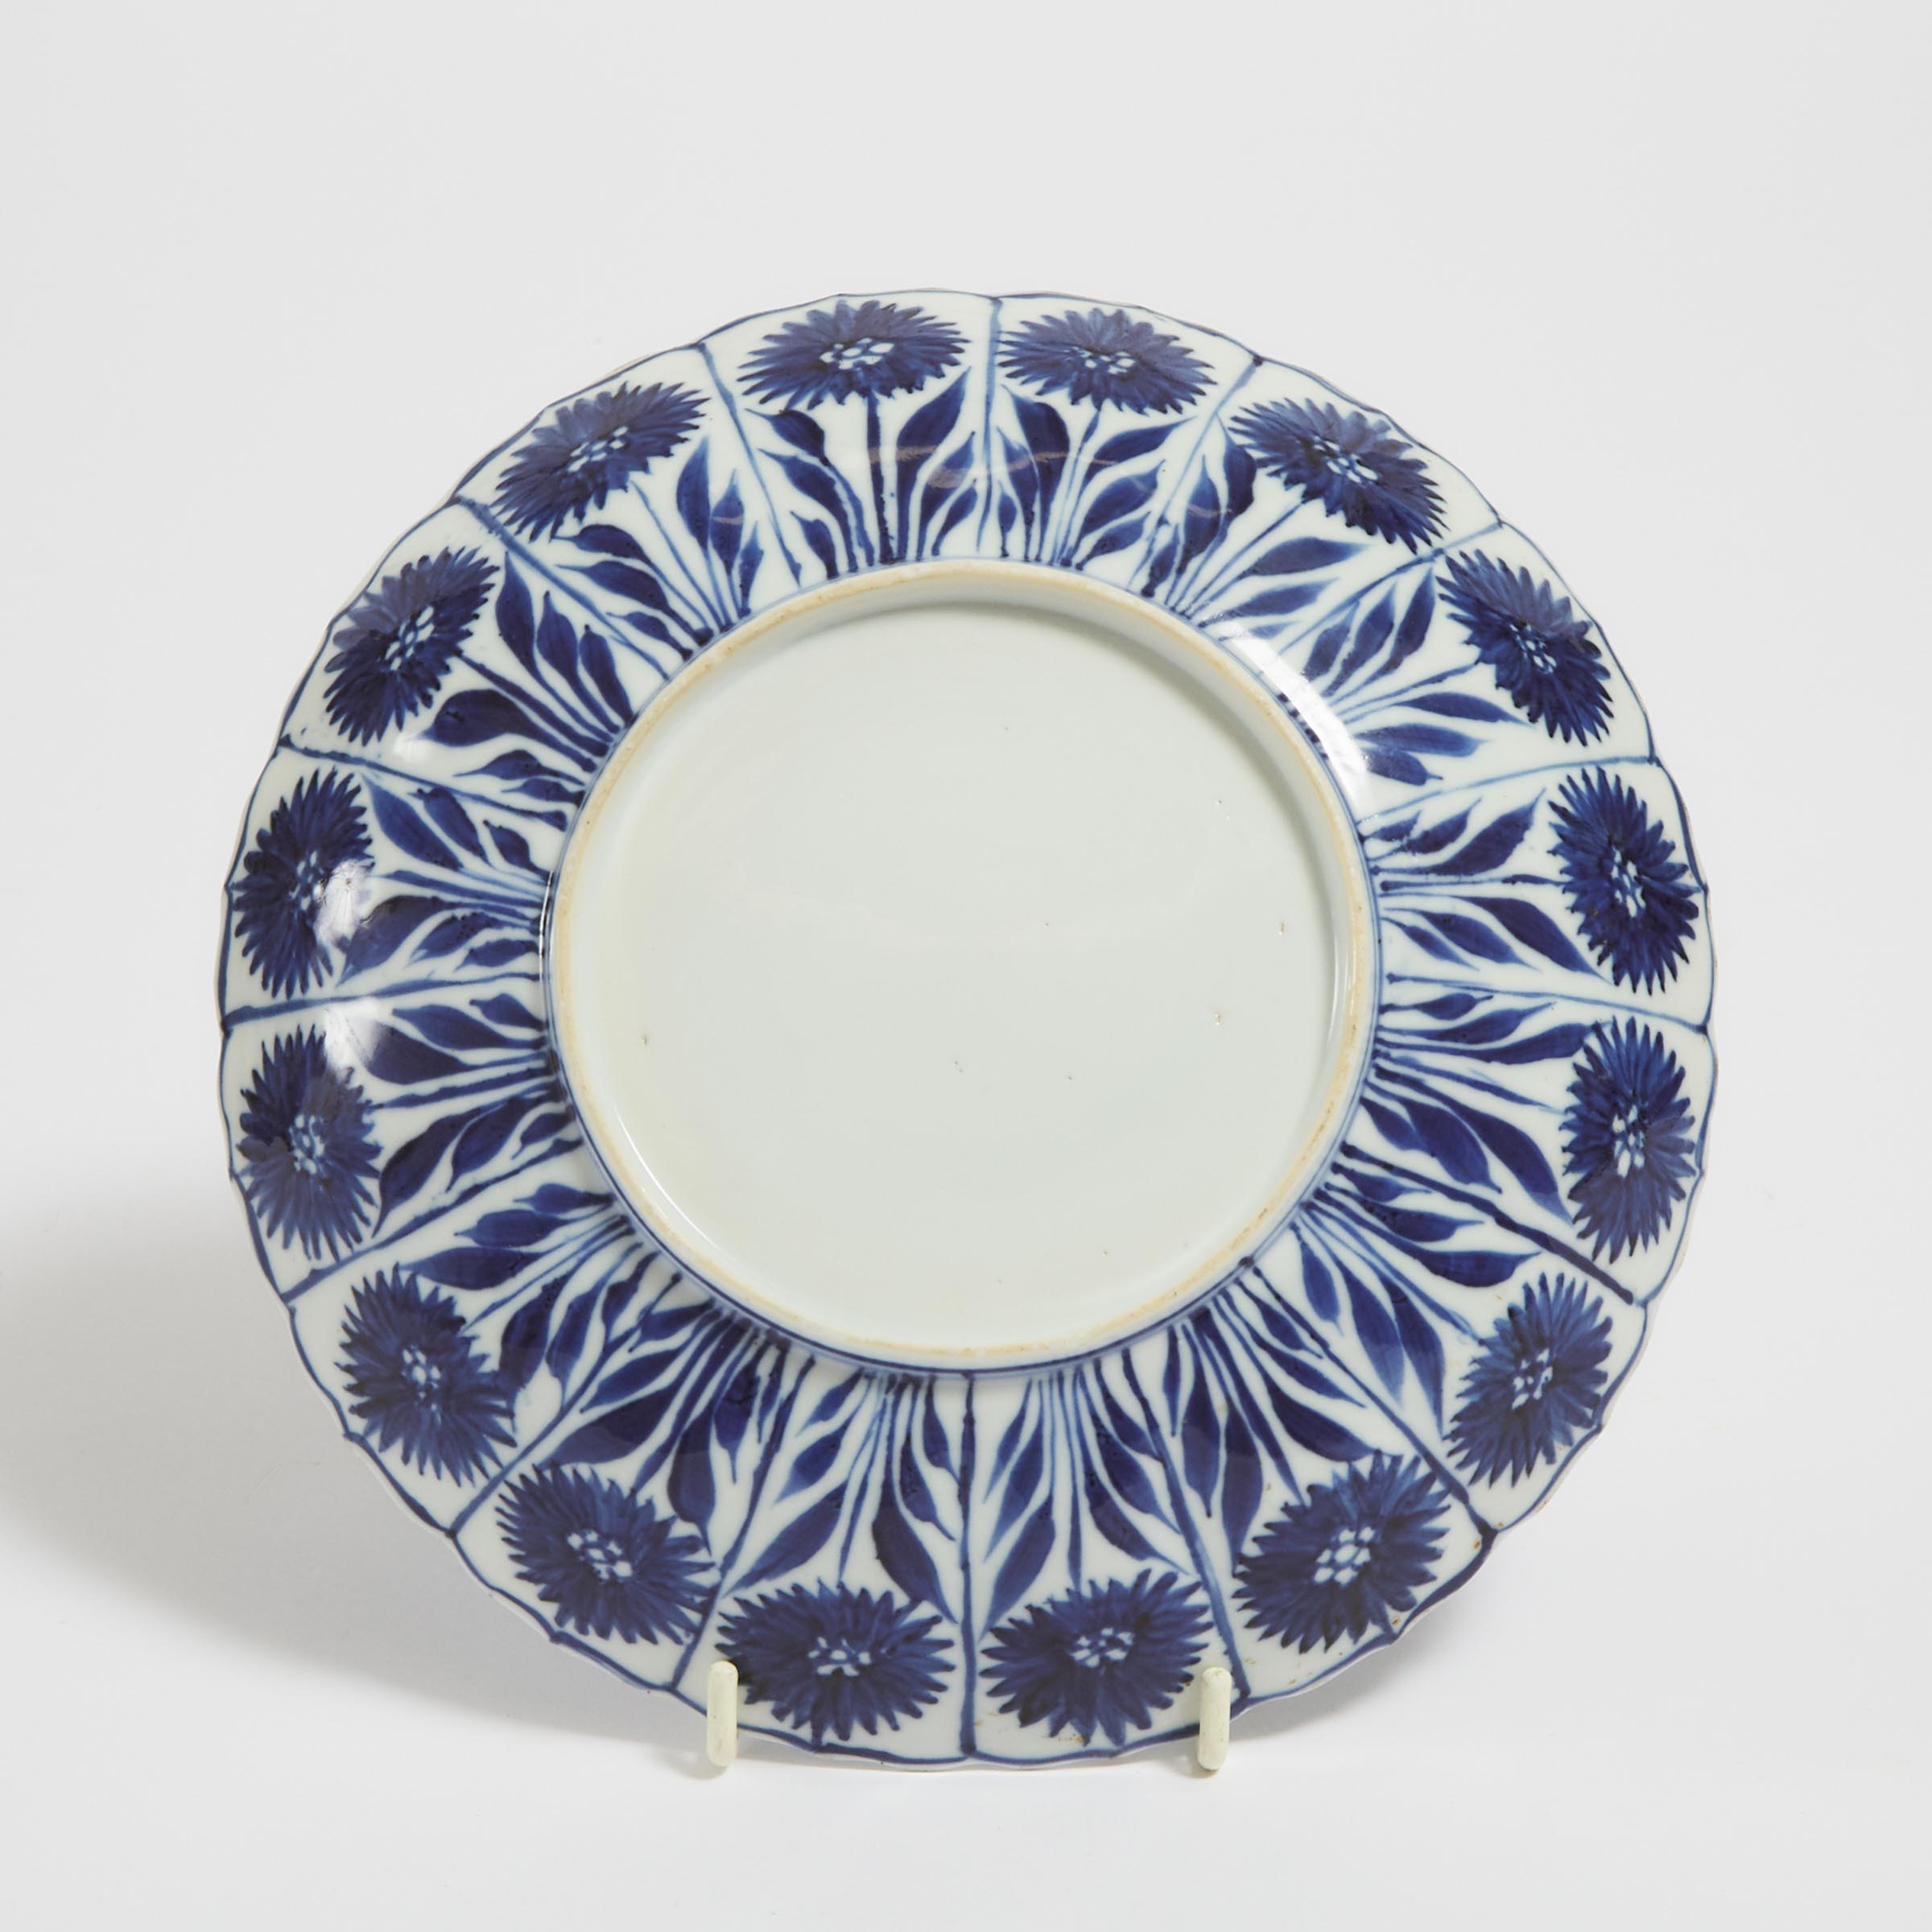 A Blue and White 'Lotus' Lobed Plate, Kangxi Period (1662-1722)